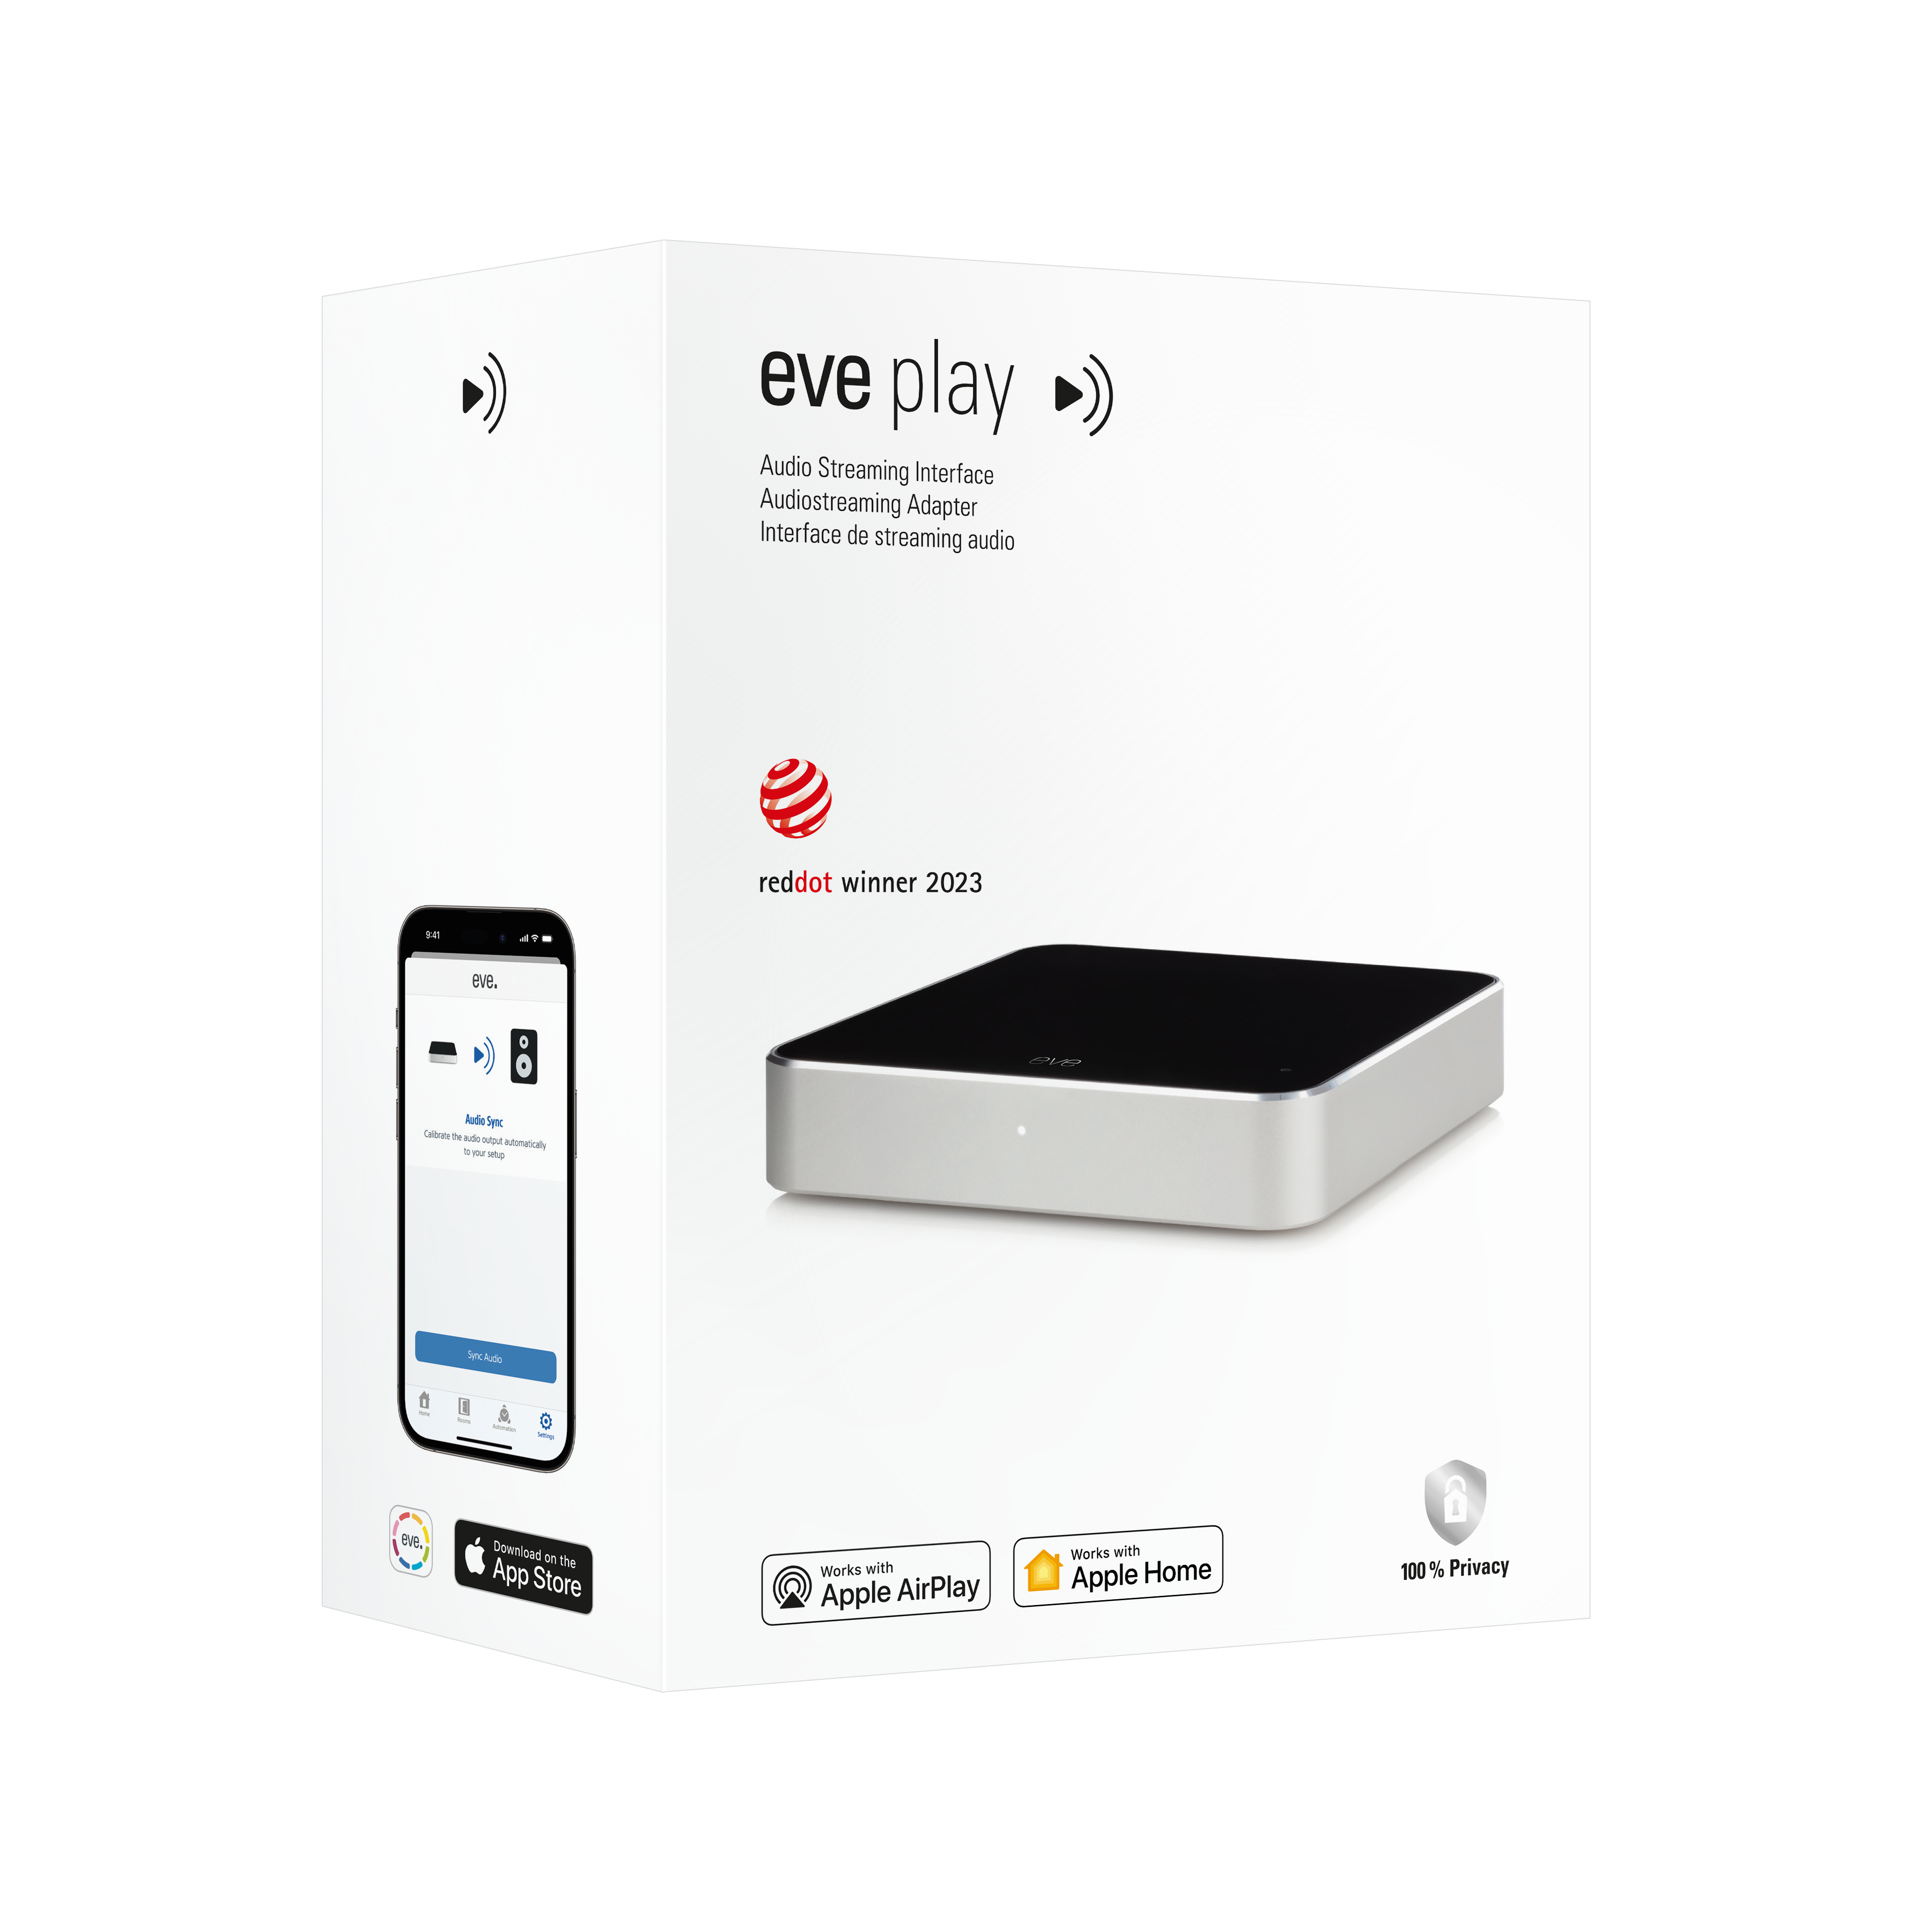 Eve Play ist offiziell: Neuer Audio-Adapter mit AirPlay 2